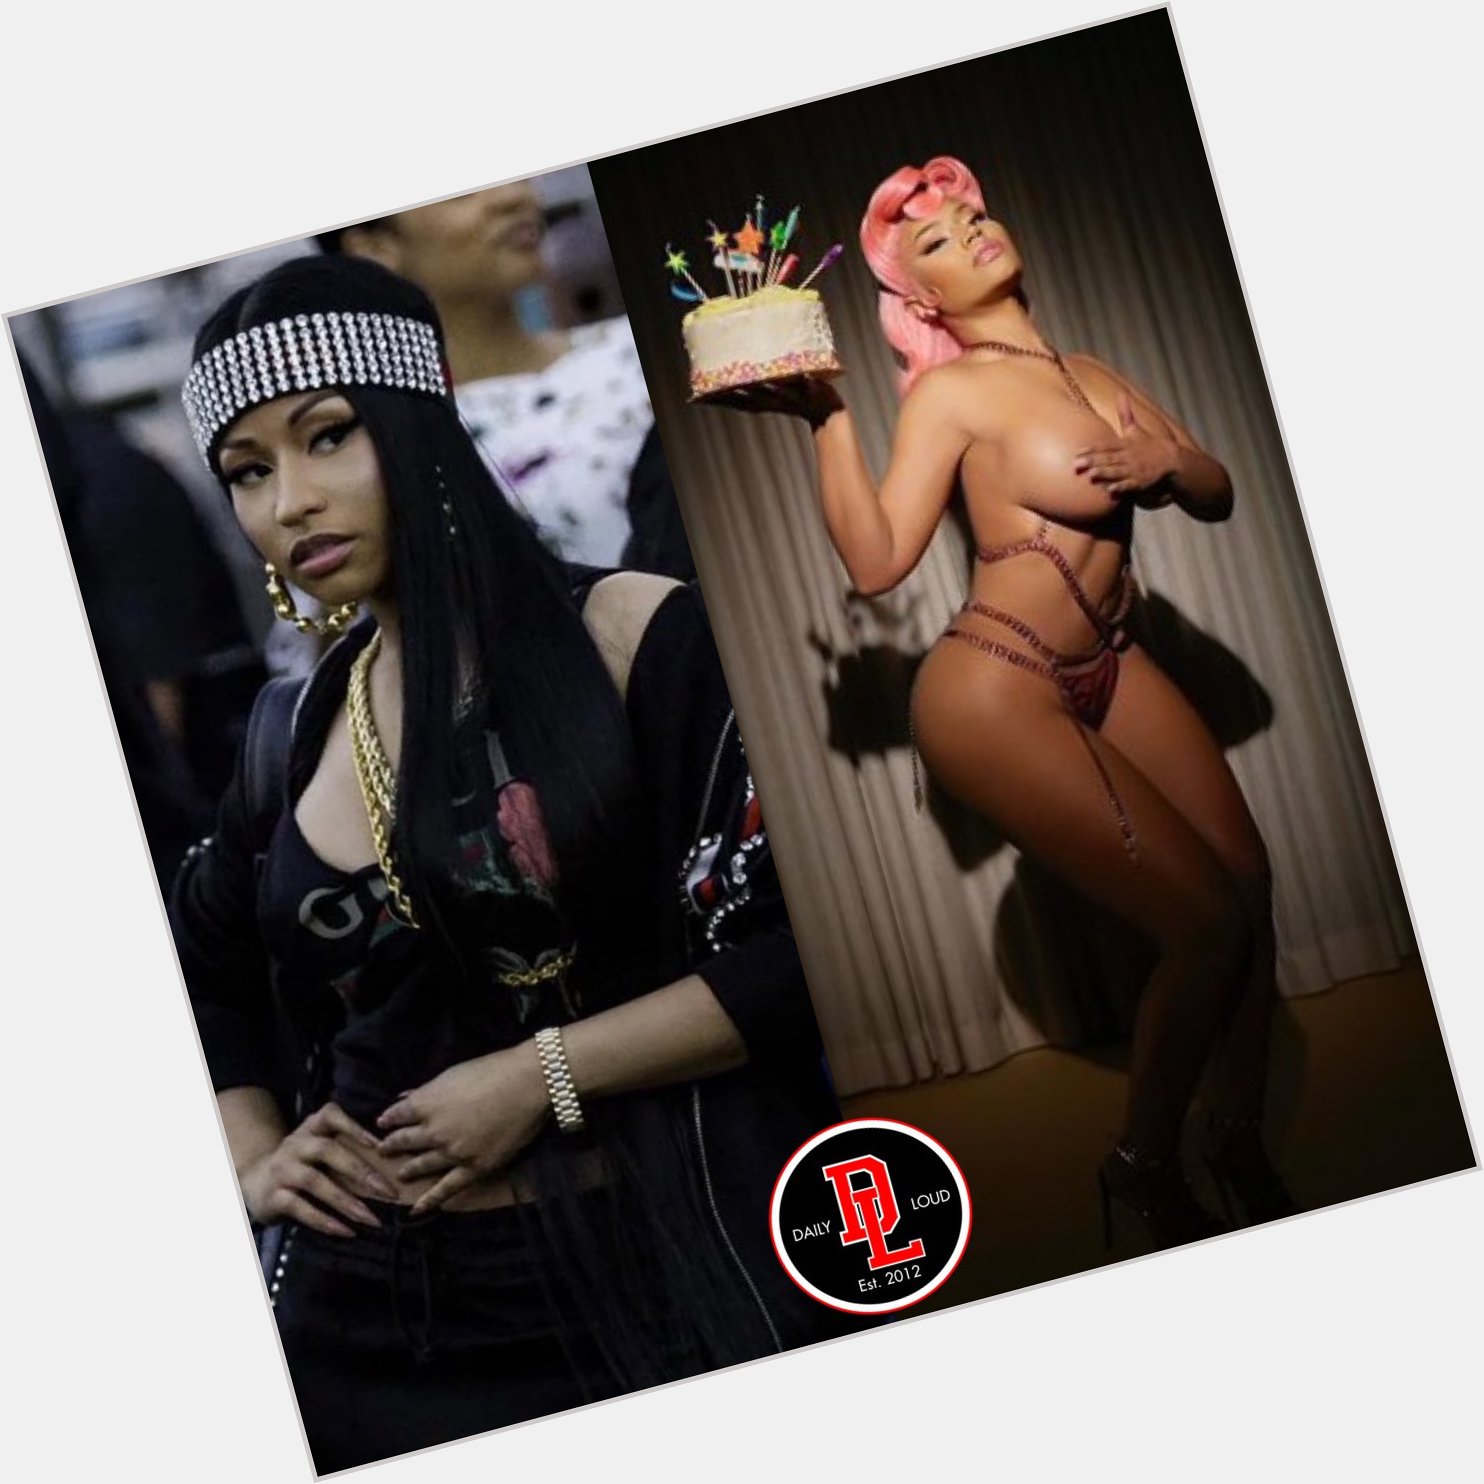 Happy birthday to the Queen, Nicki Minaj Today the legend turns 40 years old  